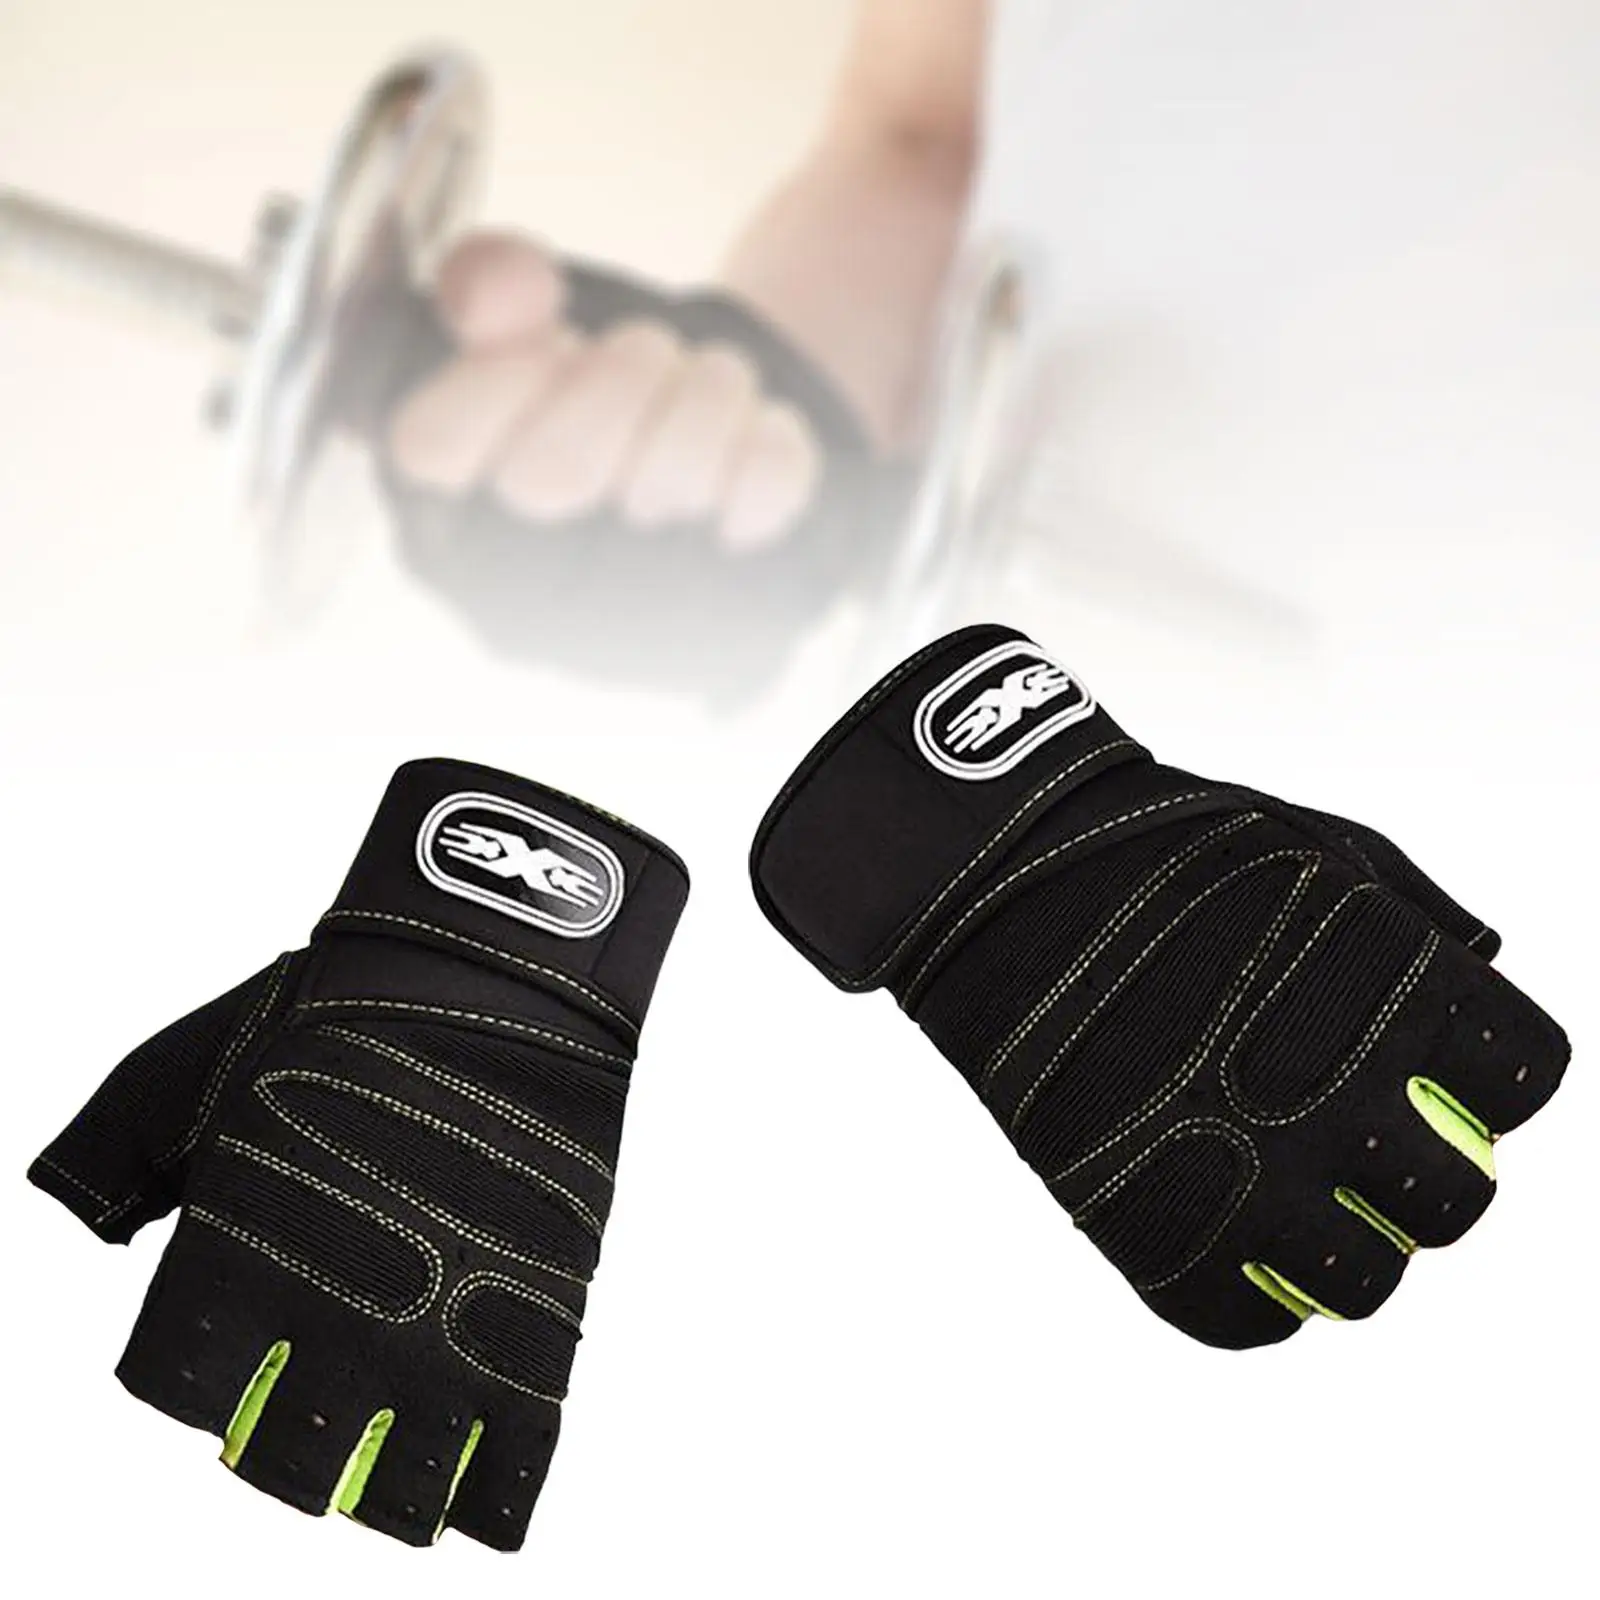 Gym Gloves Nonslip Wrist Support Knit Pads Lightweight Weight Lifting Gloves for Bodybuilding Training Pull Ups Cycling Workout